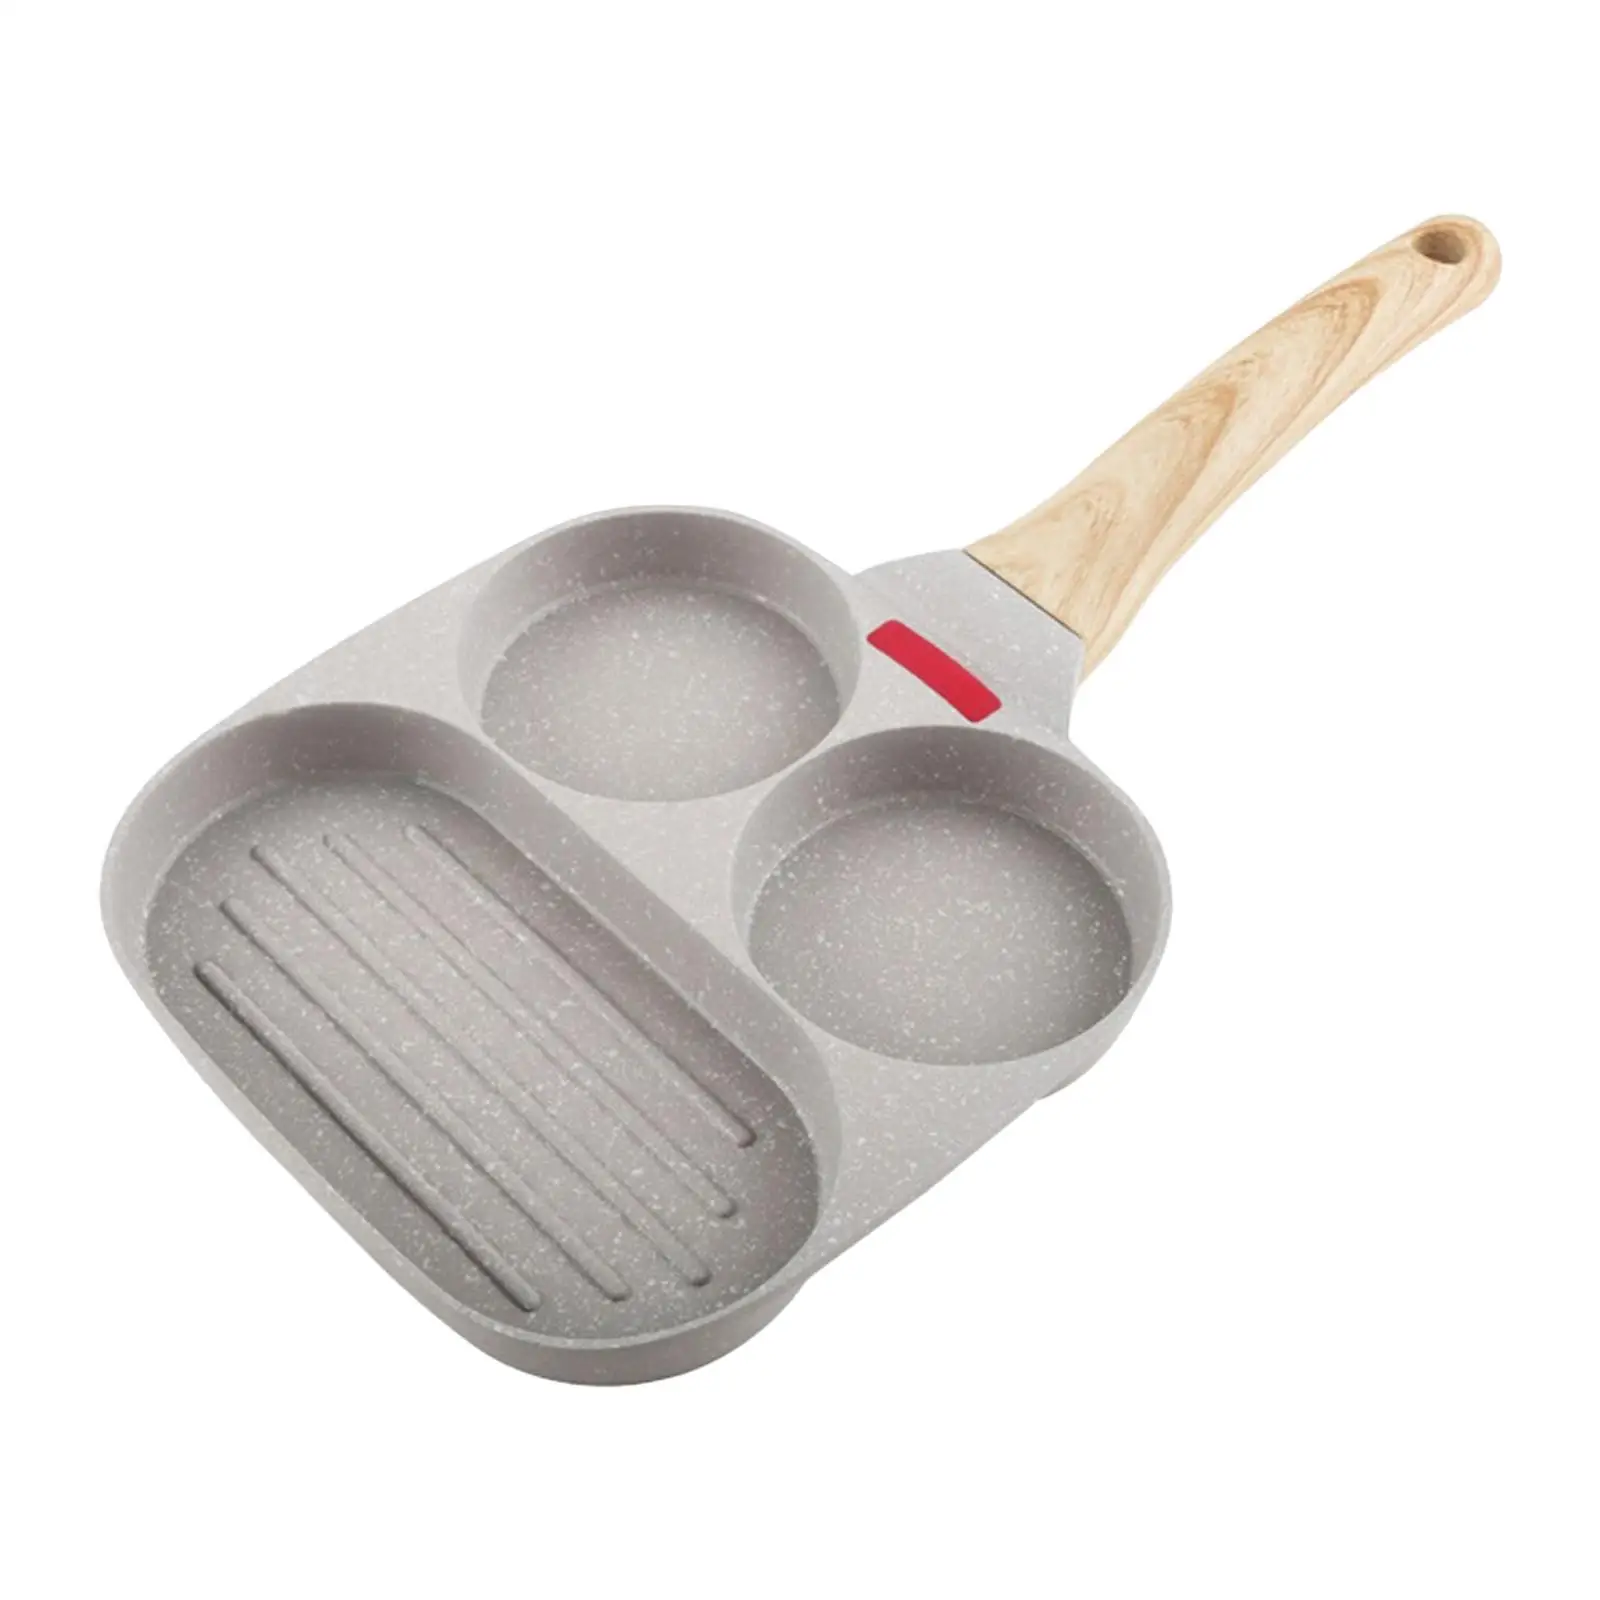 Egg Frying Pan 2 Cup with Anti Scald Handle Sandwich Maker Multifunction Baking Pan for Restaurant Camping Sausage Home Kitchen